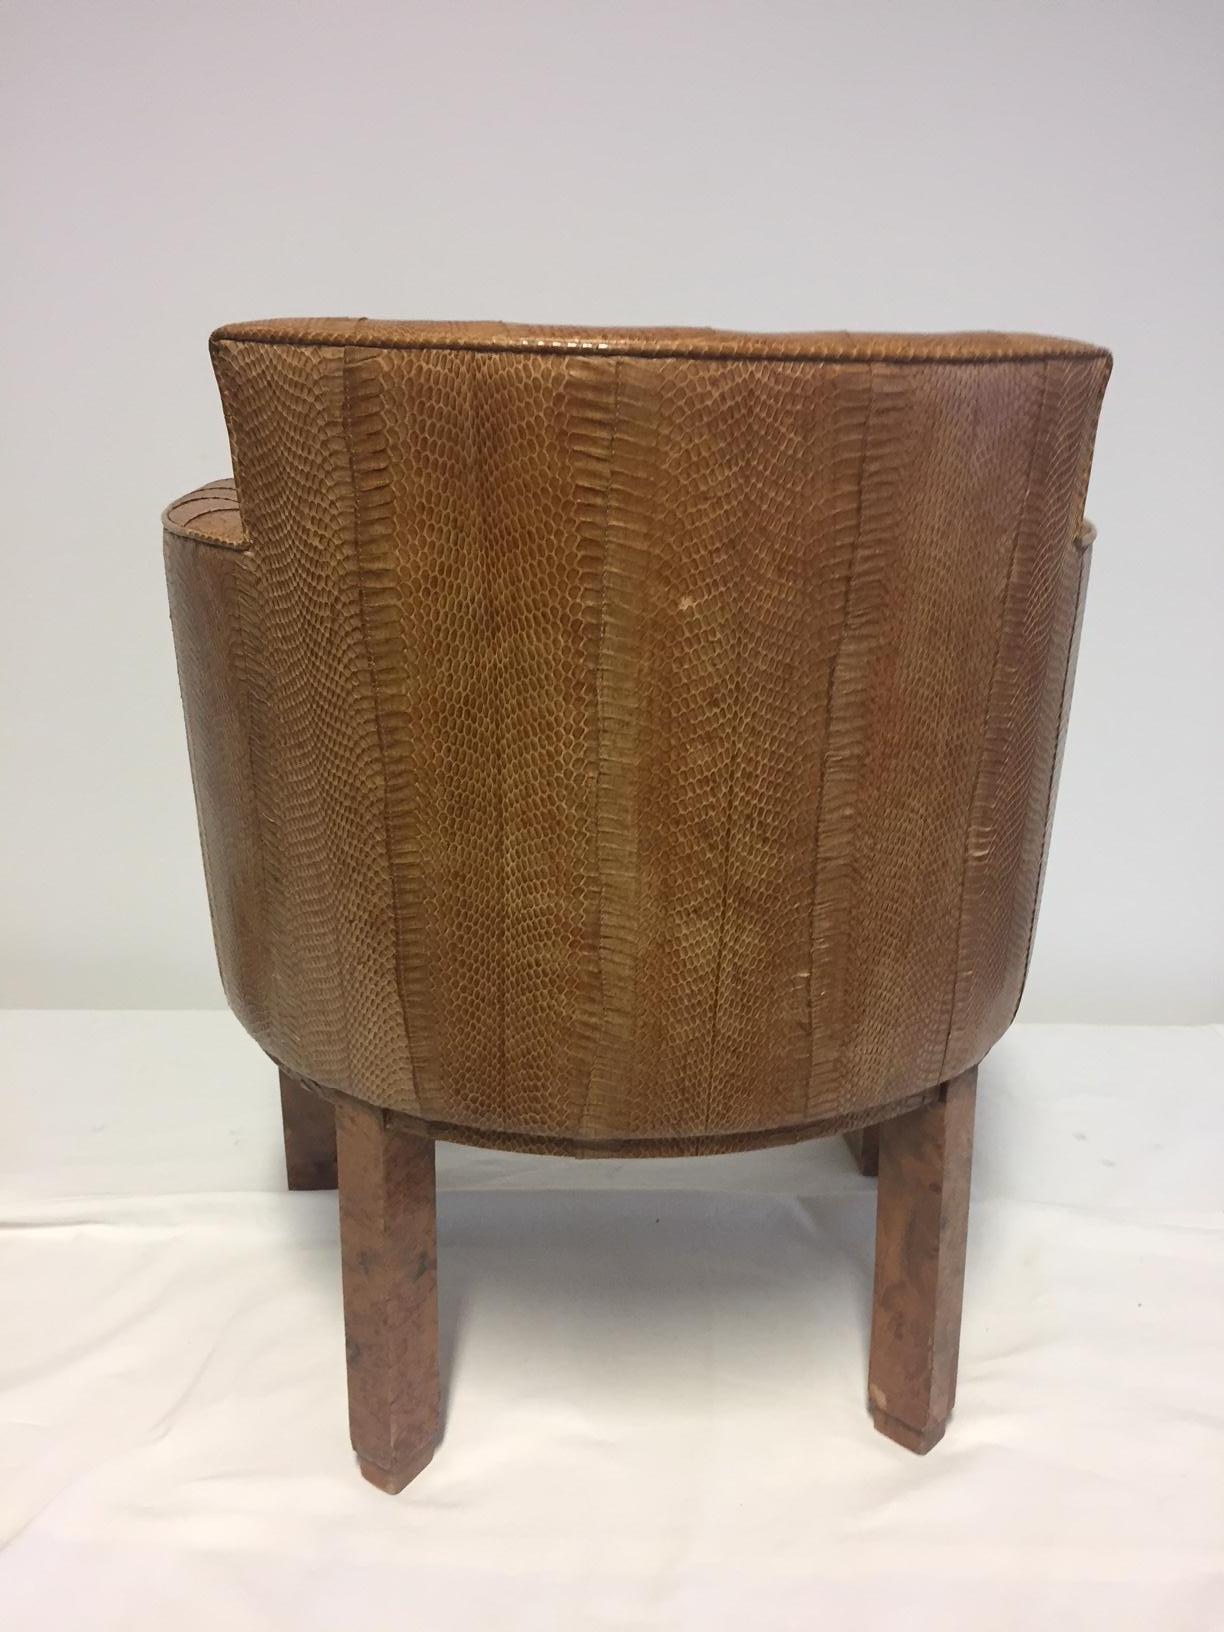 Early 20th Century Michel Duffet Art Deco Armchair Elm Burl Veneer and Snake Skin Upholstery For Sale